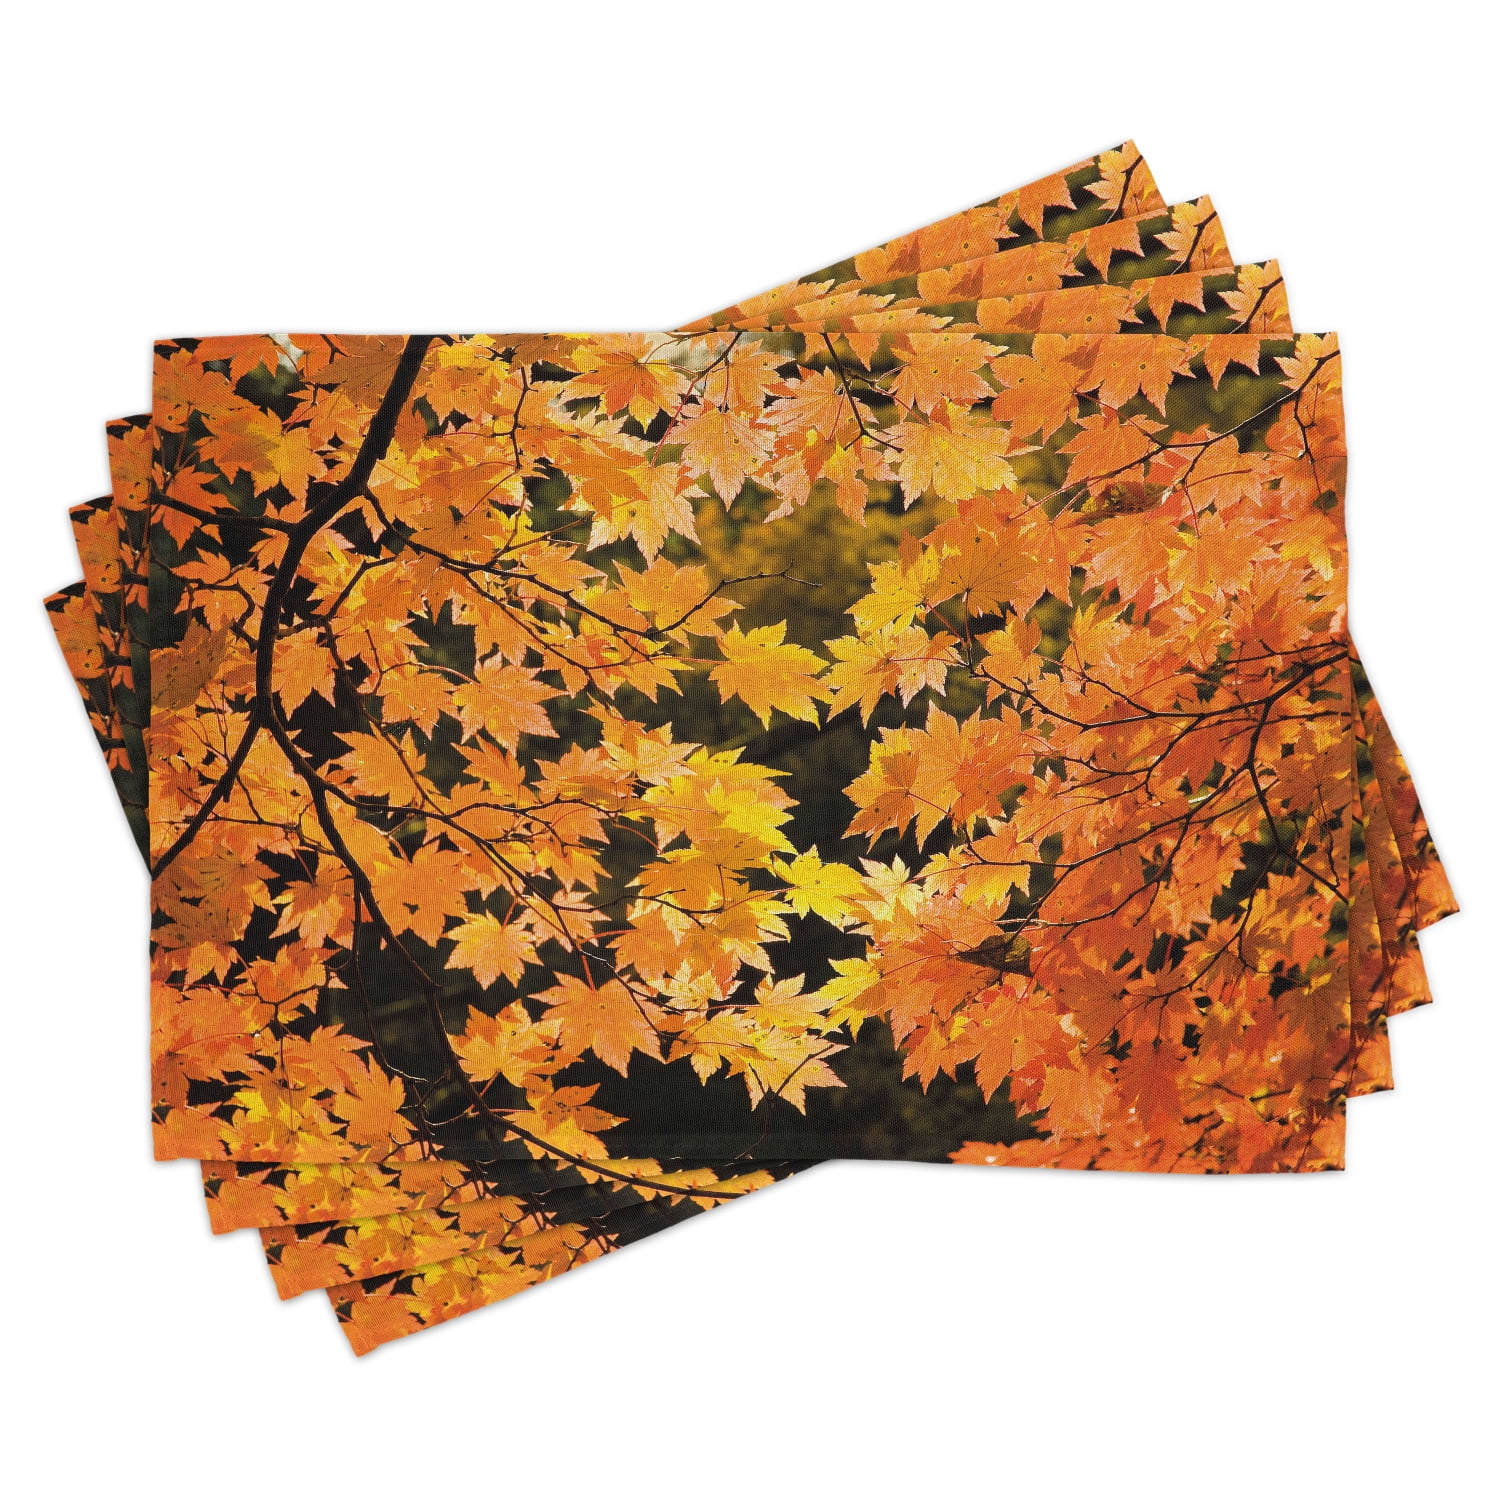 Harvest Time Collage ~ Fall & Autumn Tapestry Placemat 725734261618 